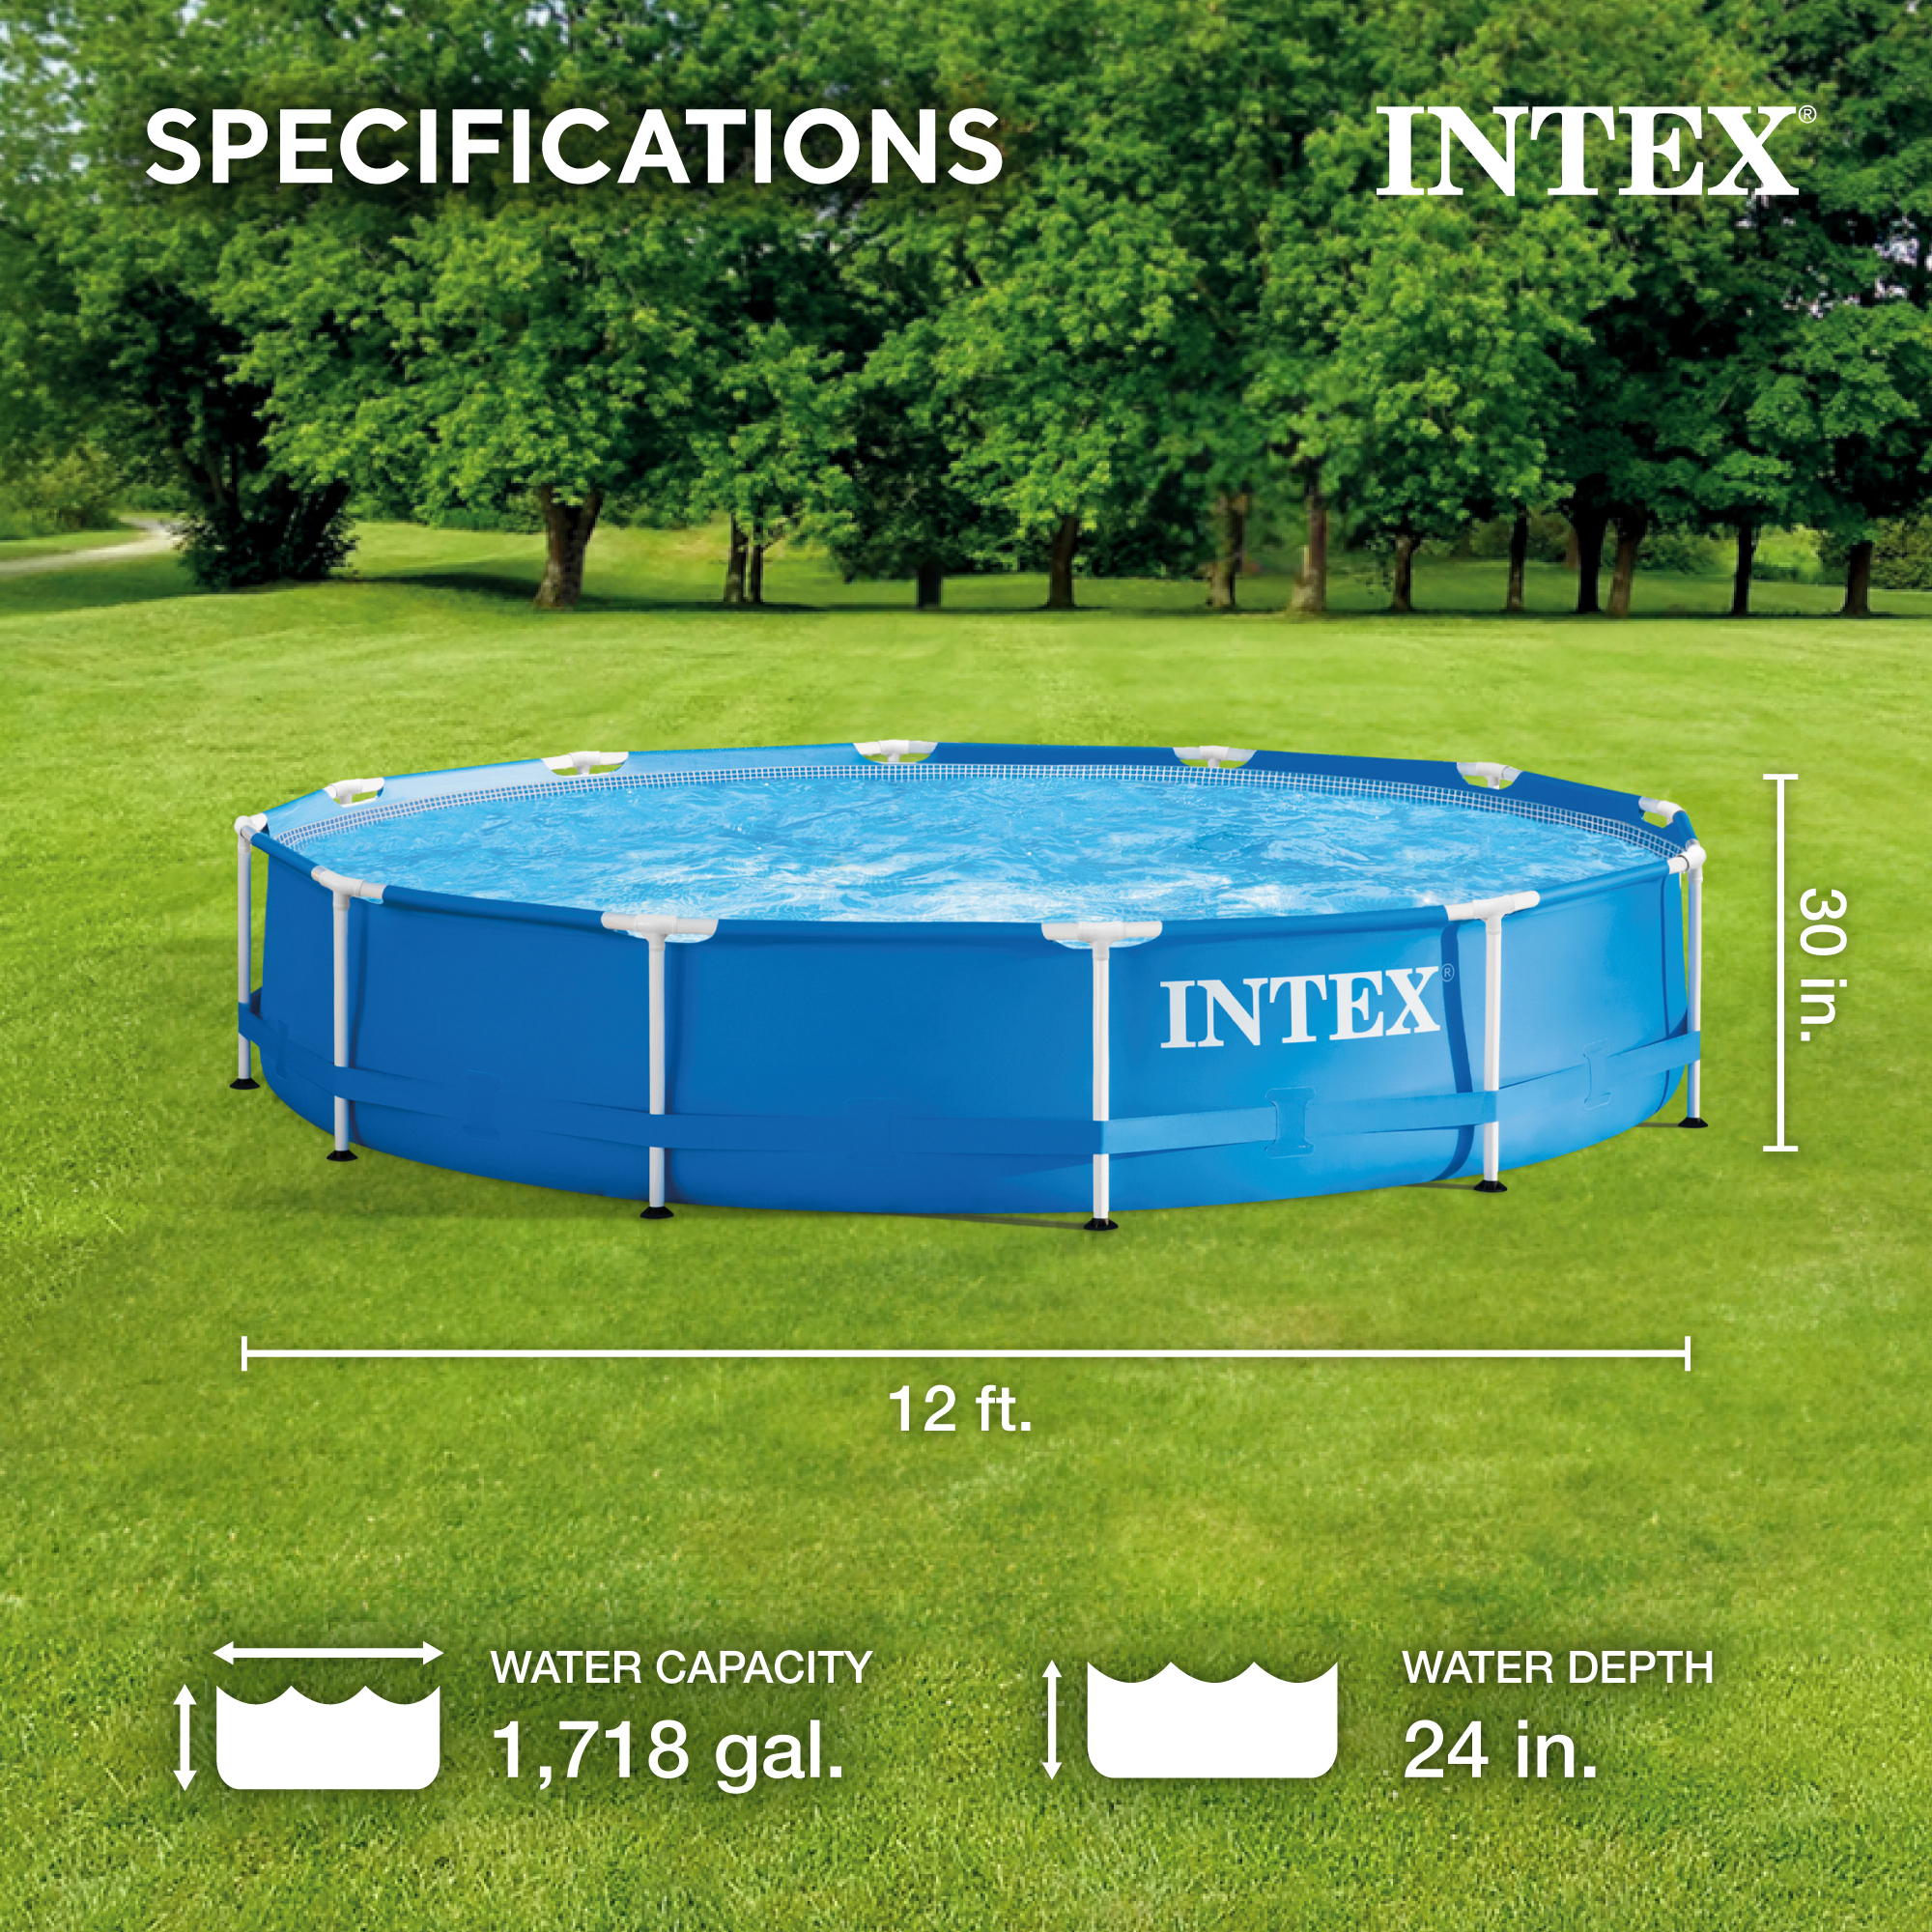 Intex 12' x 30'' Metal Frame Above Ground Swimming Pool with Filter Pump - image 3 of 13